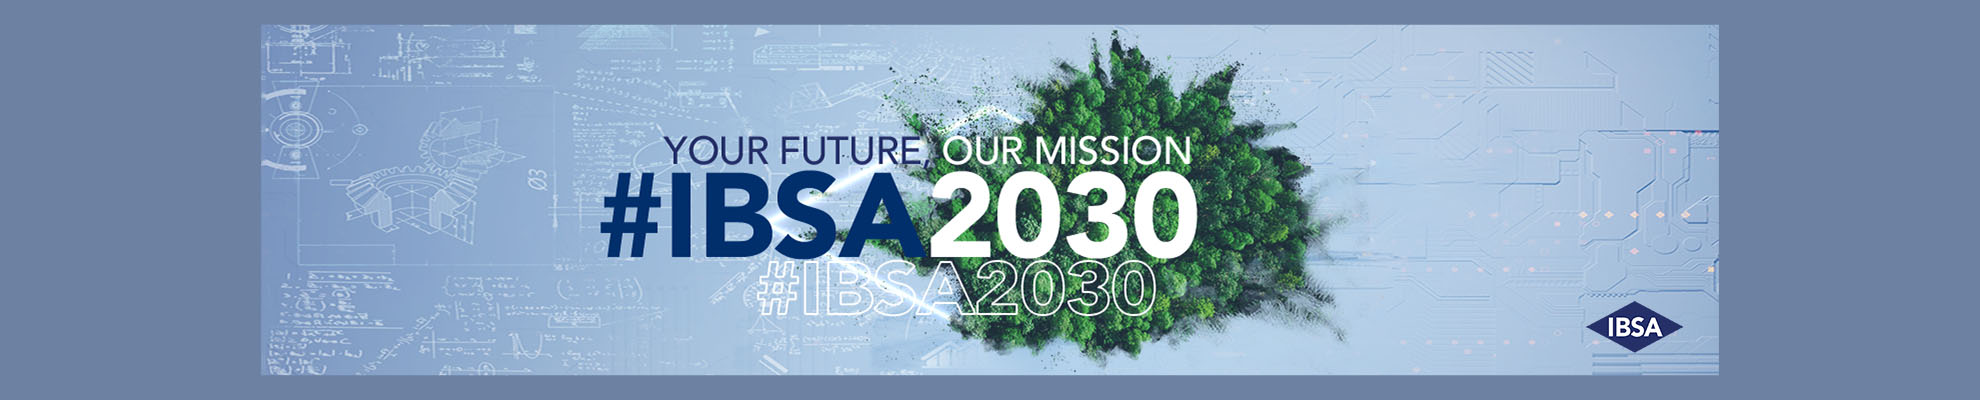 #IBSA2030. Your Future, Our Mission